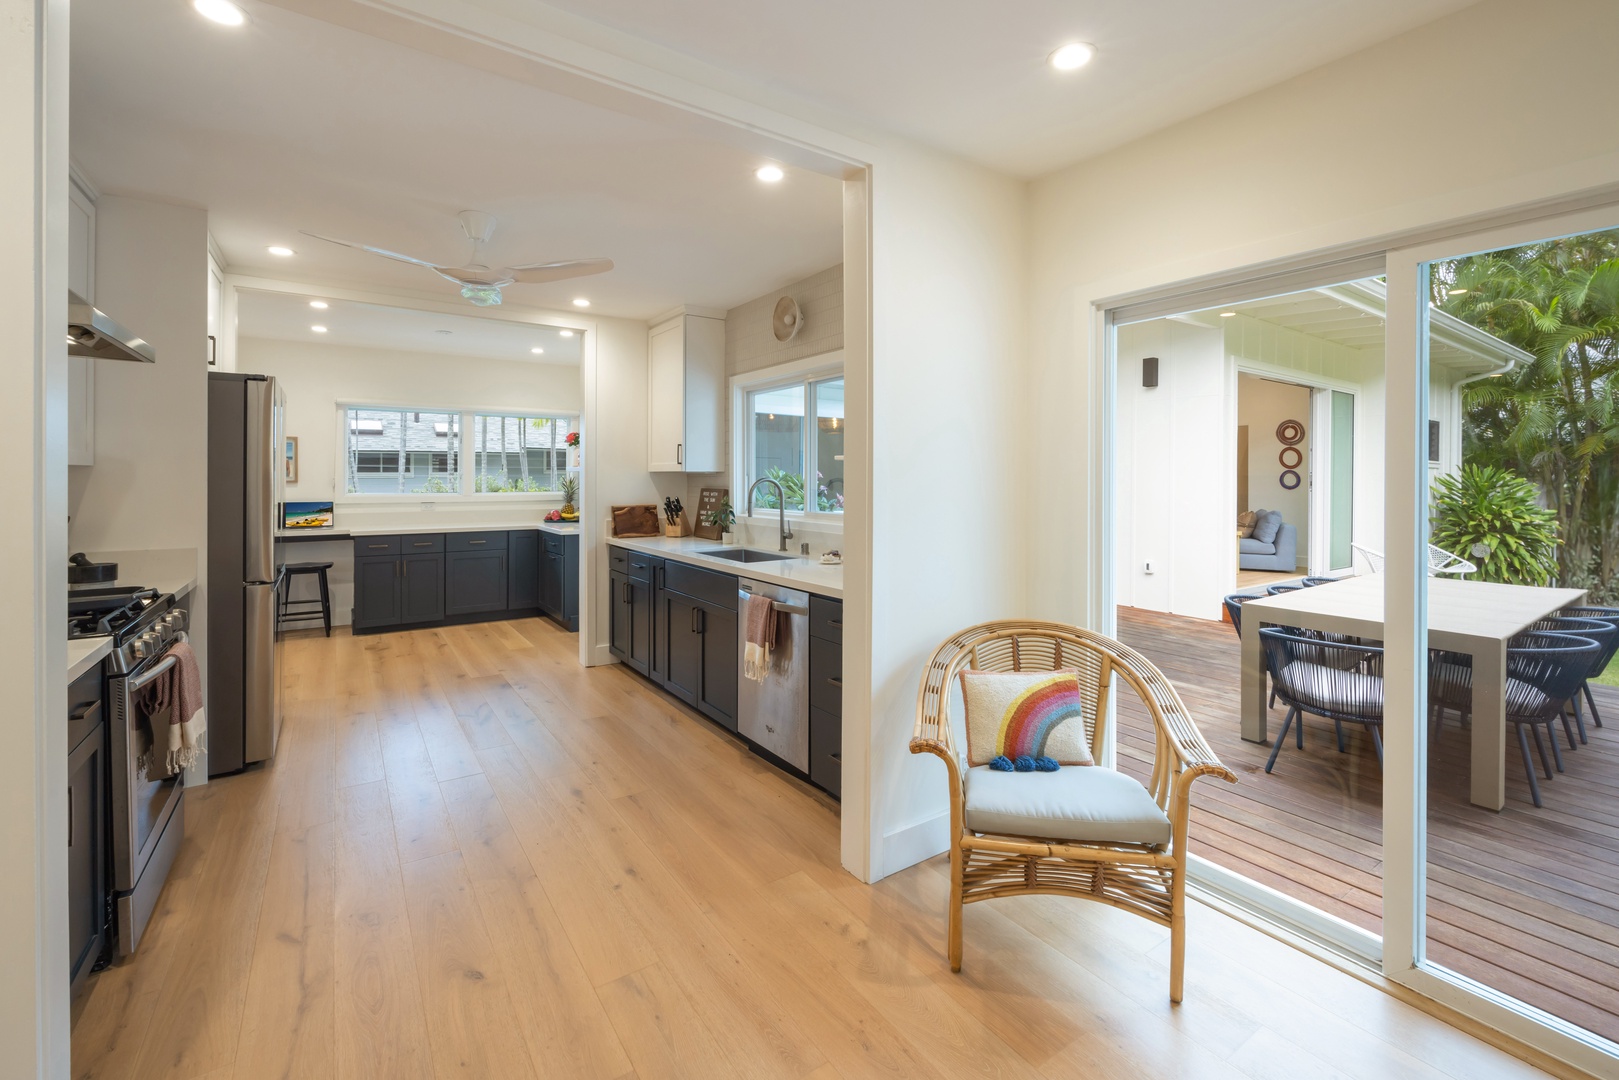 Kailua Vacation Rentals, Lanikai Ola Nani - Fully-stocked kitchen with top-tiered appliances for your culinary ventures.